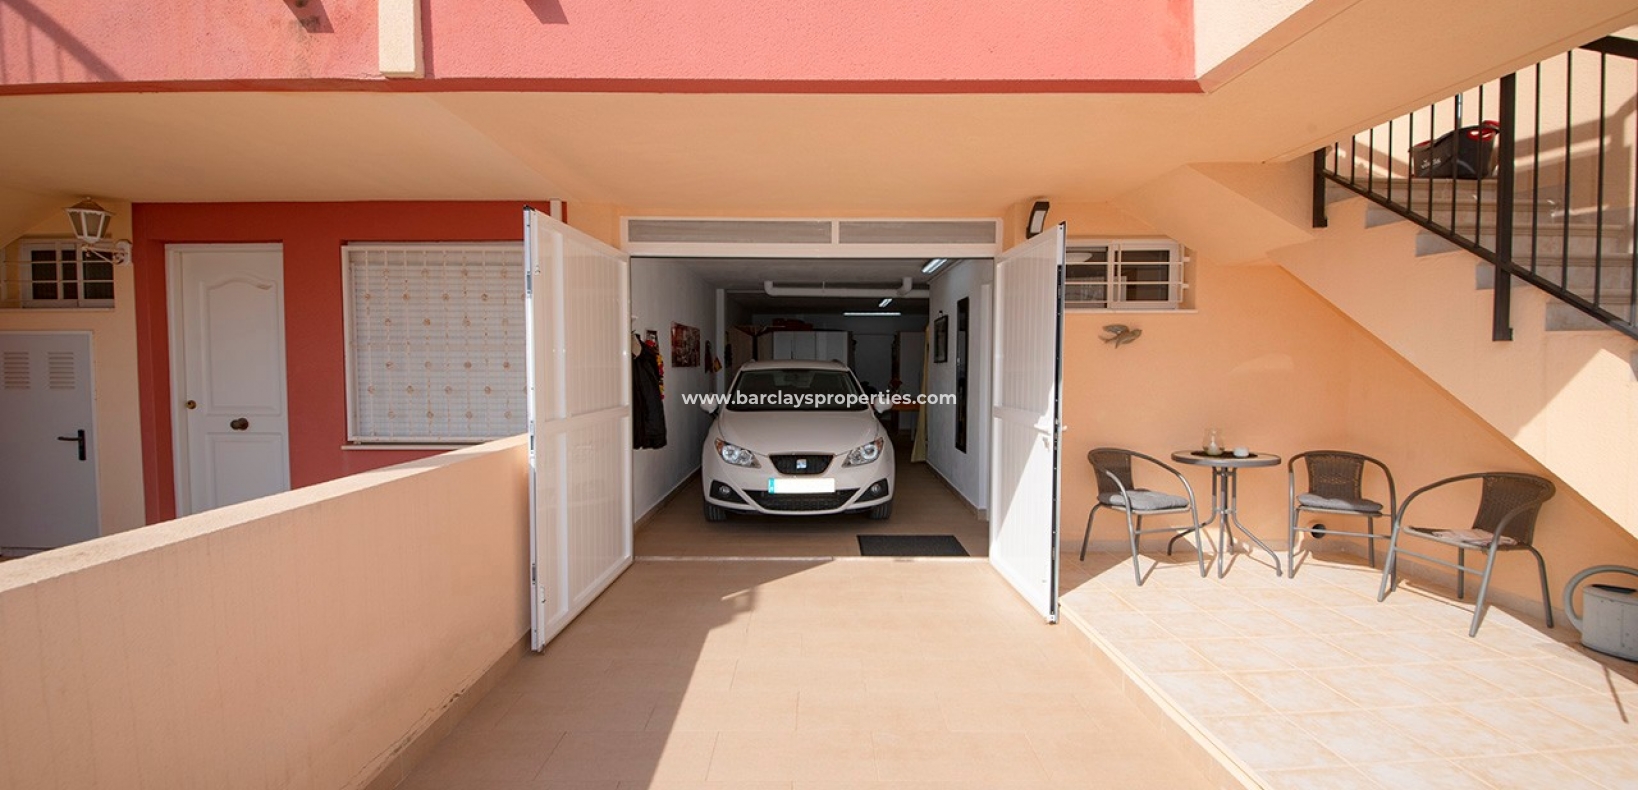 Town House Style Property for Sale in La Marina, Alicante Spain. - garage